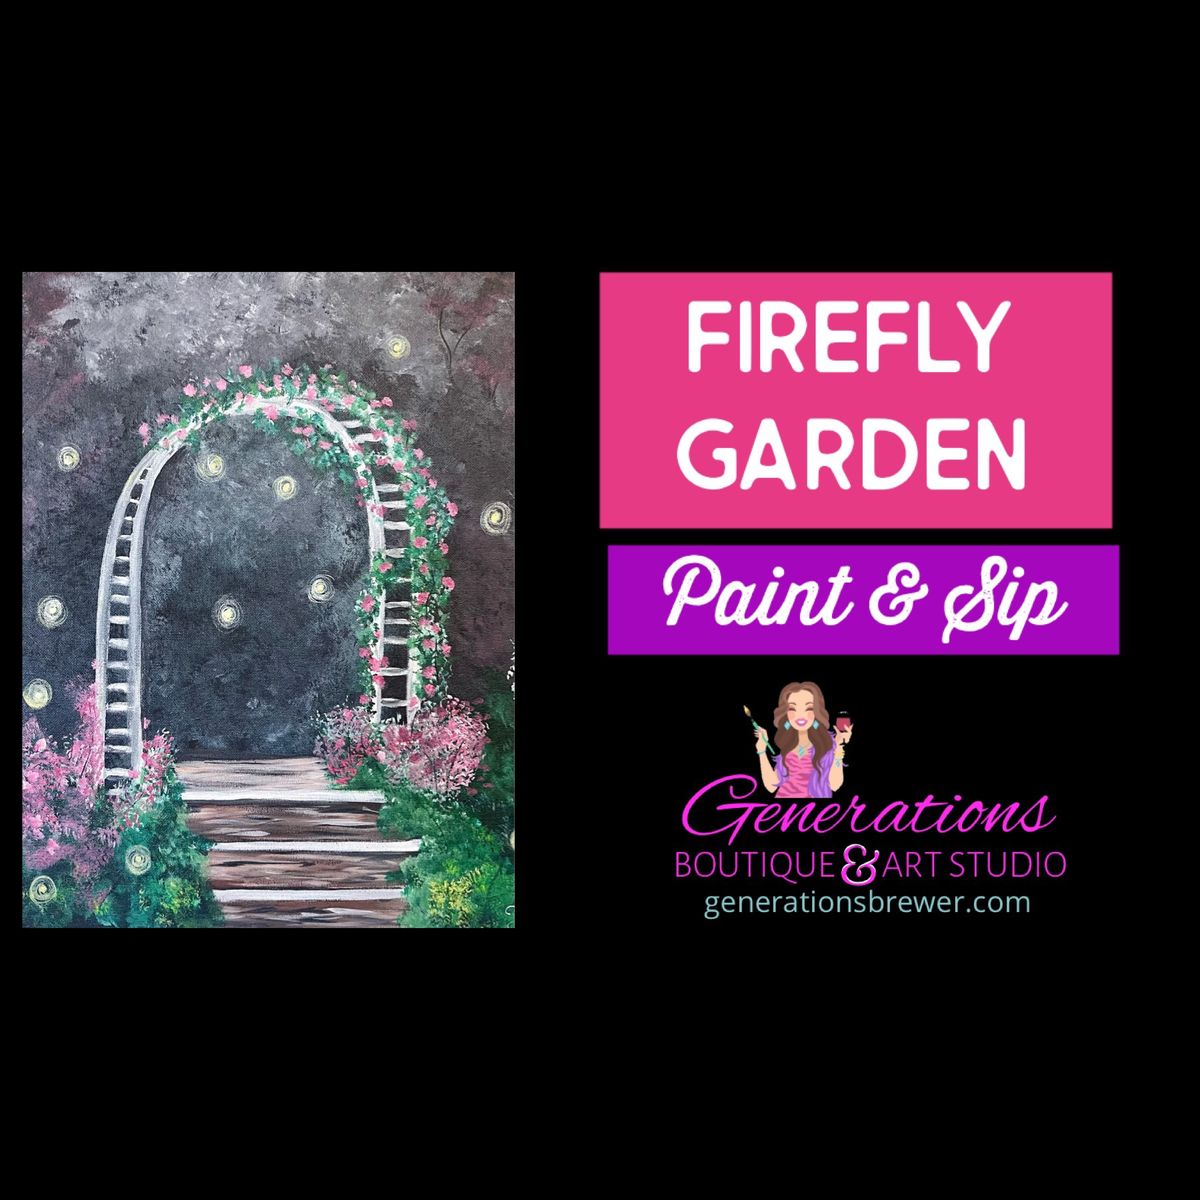 Firefly Garden Paint and Sip